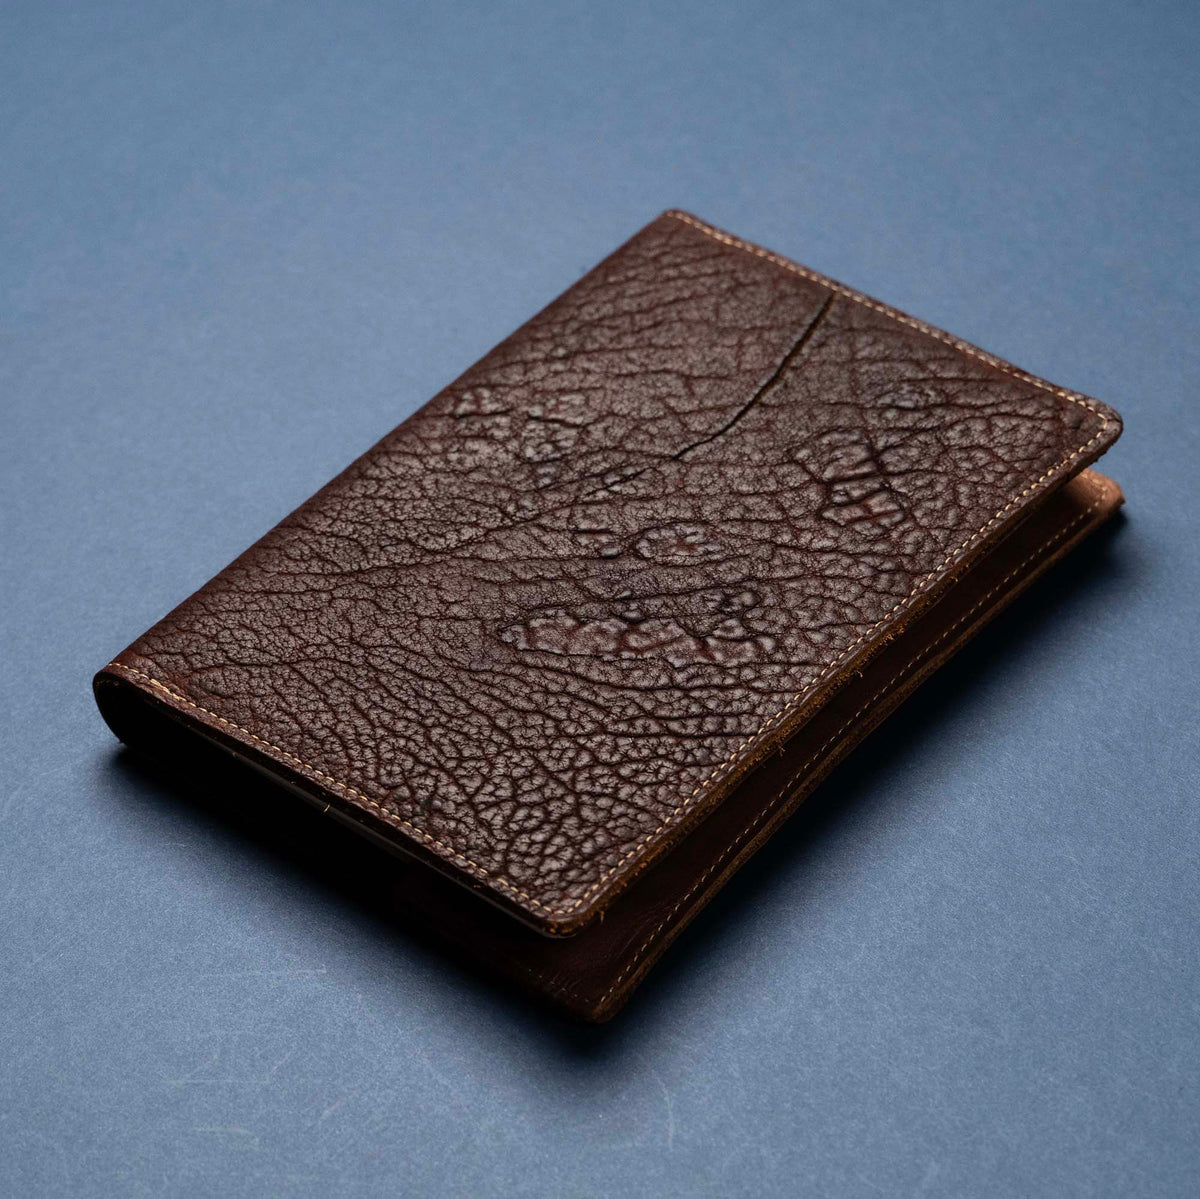 Shrunken Bison Leather - A5 Leather Journal - High Character (One-Of-A-Kind) Notebooks - 192 pages 8.75” x 6.25”